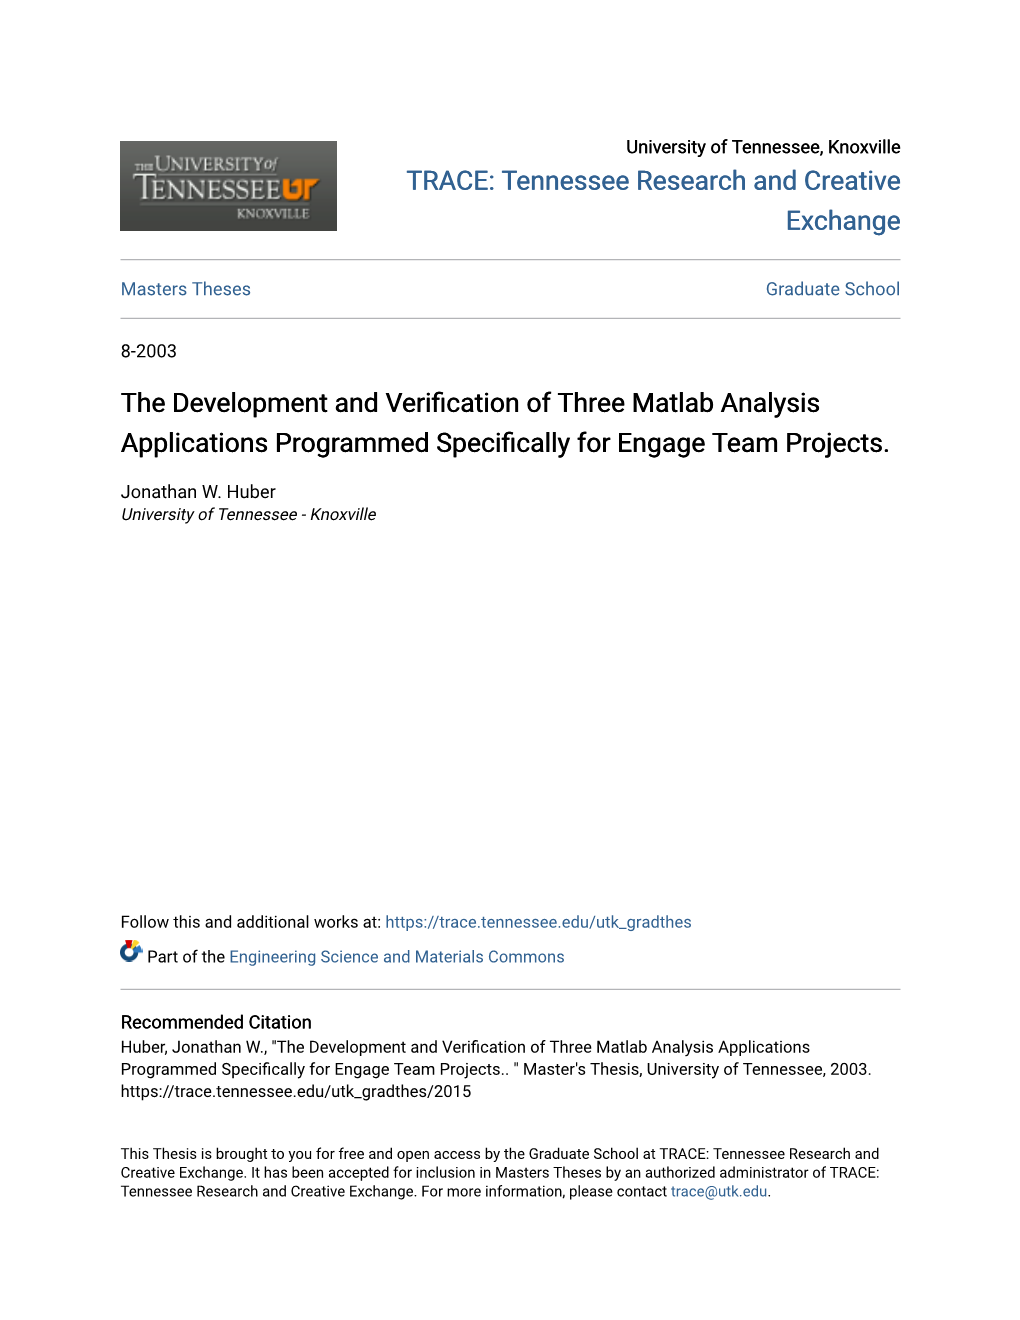 The Development and Verification of Three Matlab Analysis Applications Programmed Specifically for Engage Eamt Projects